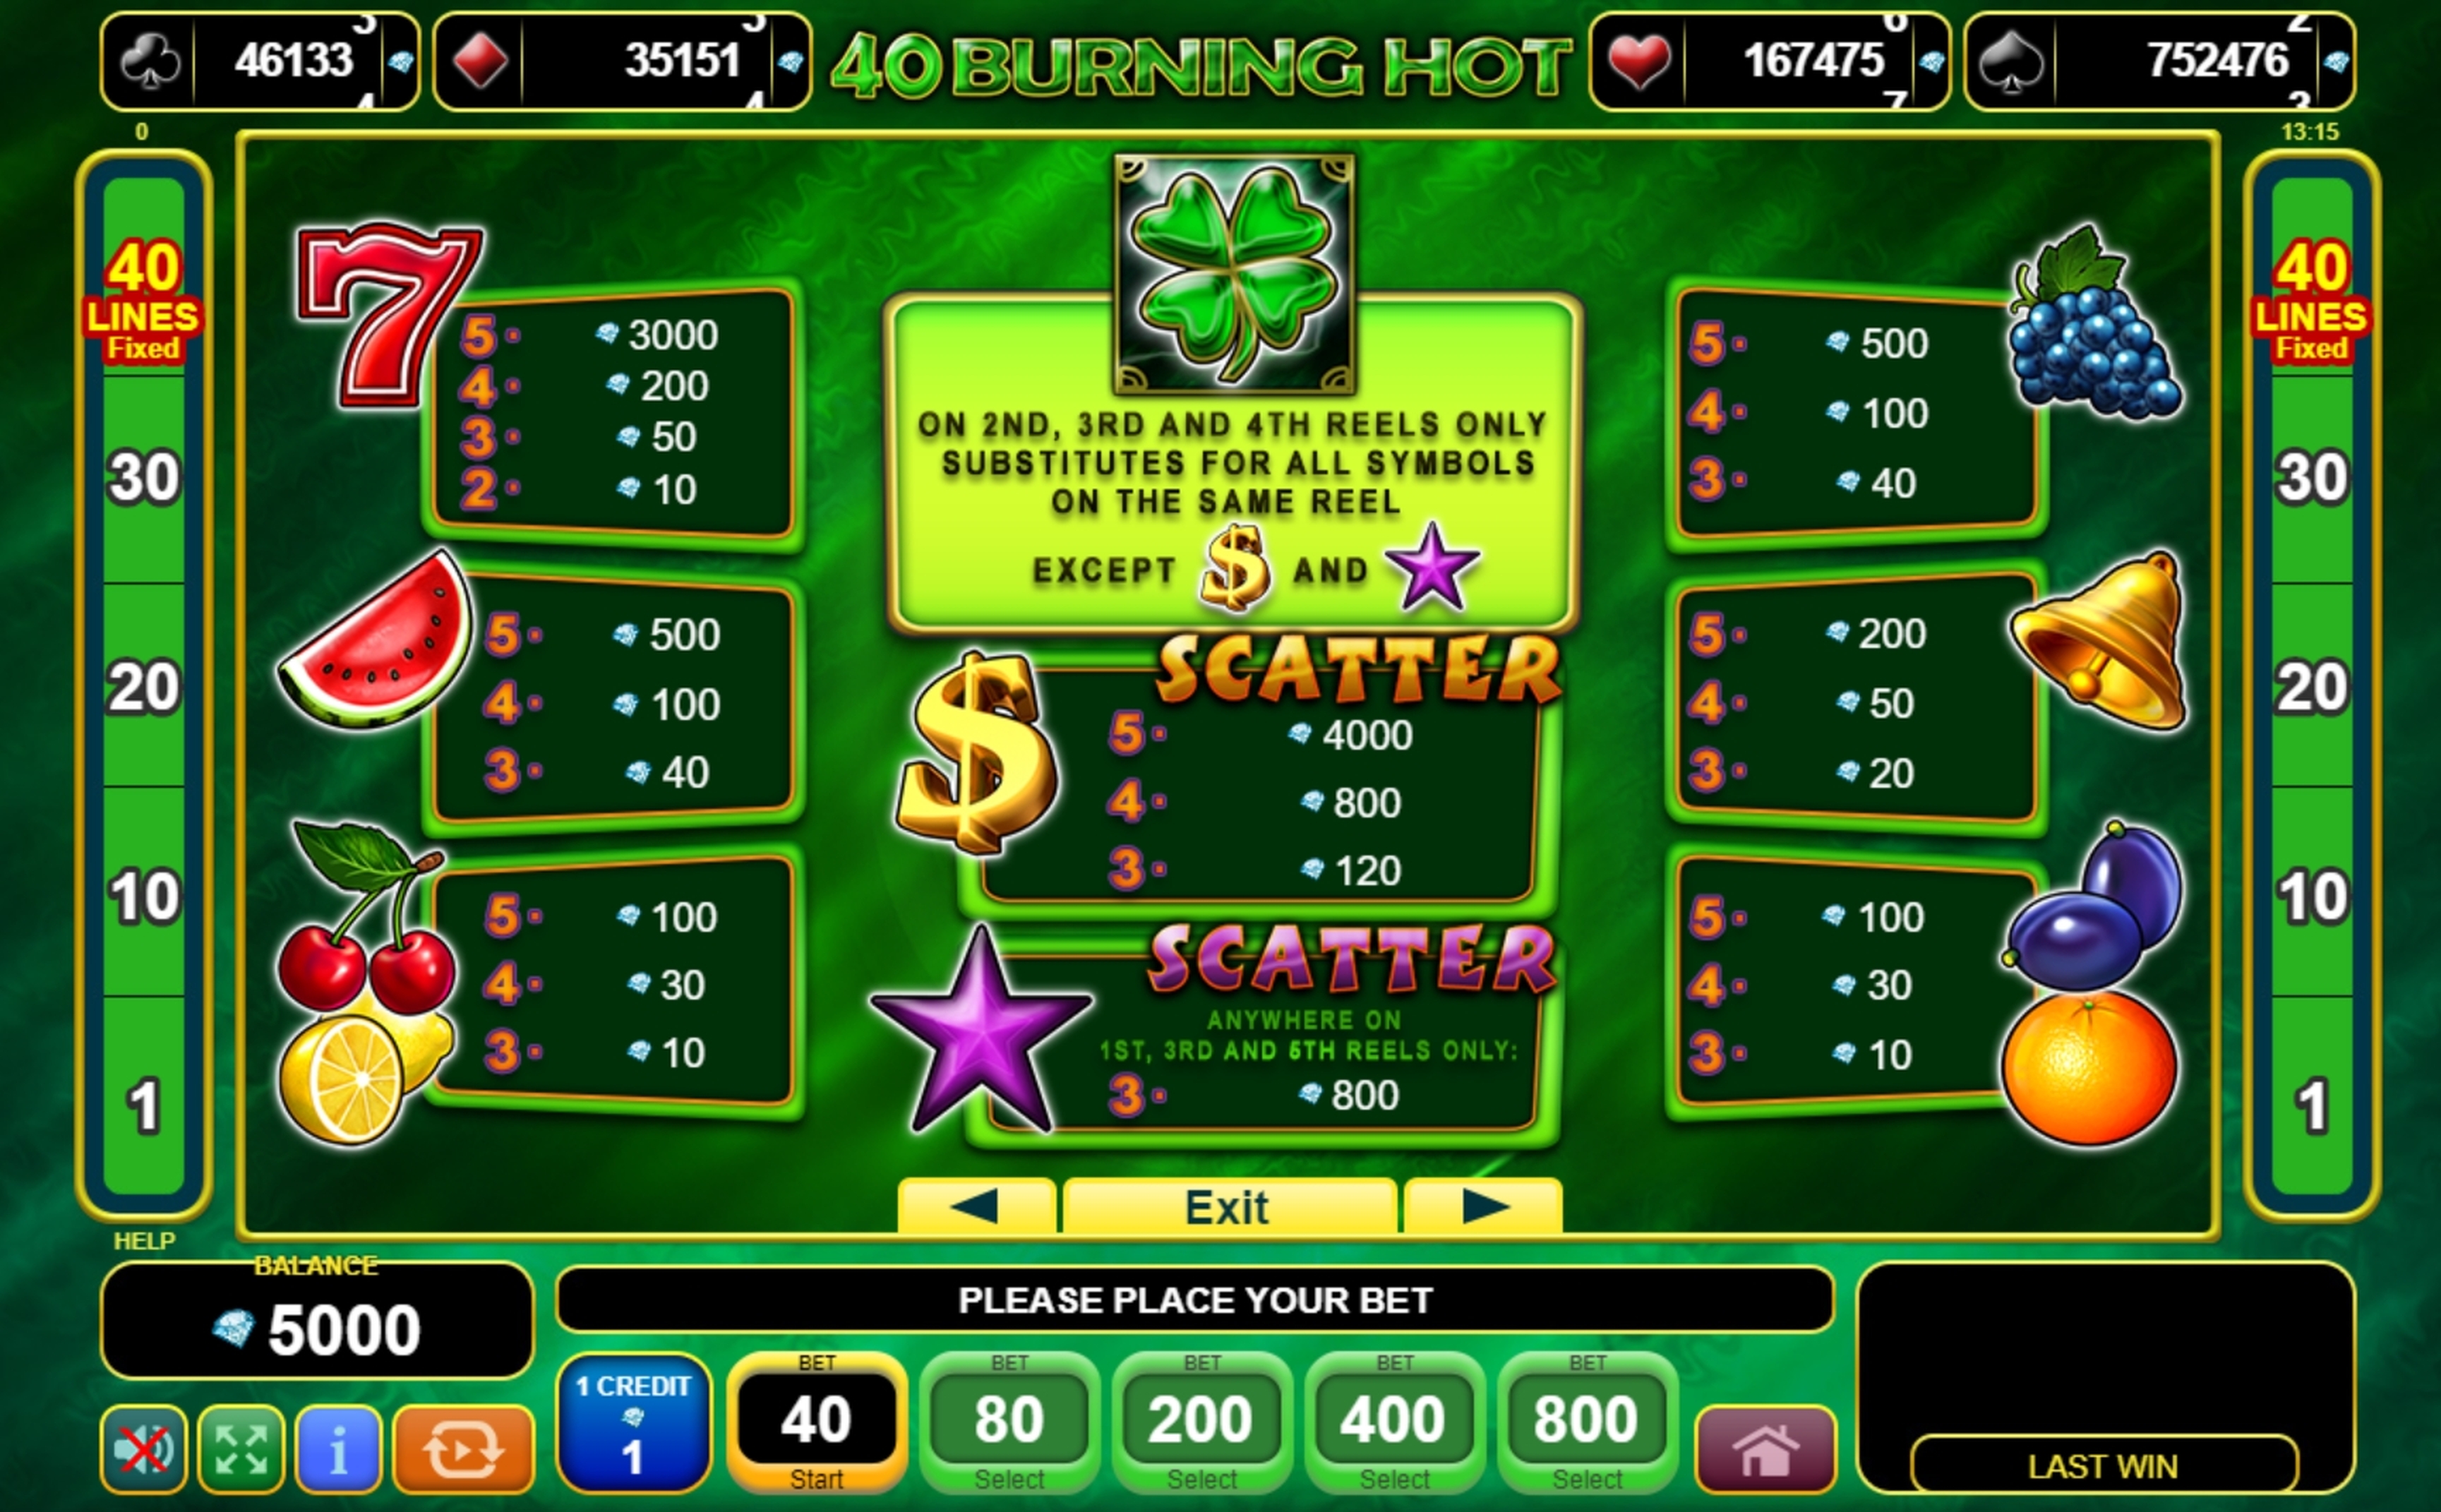 Info of 40 Burning Hot Slot Game by EGT